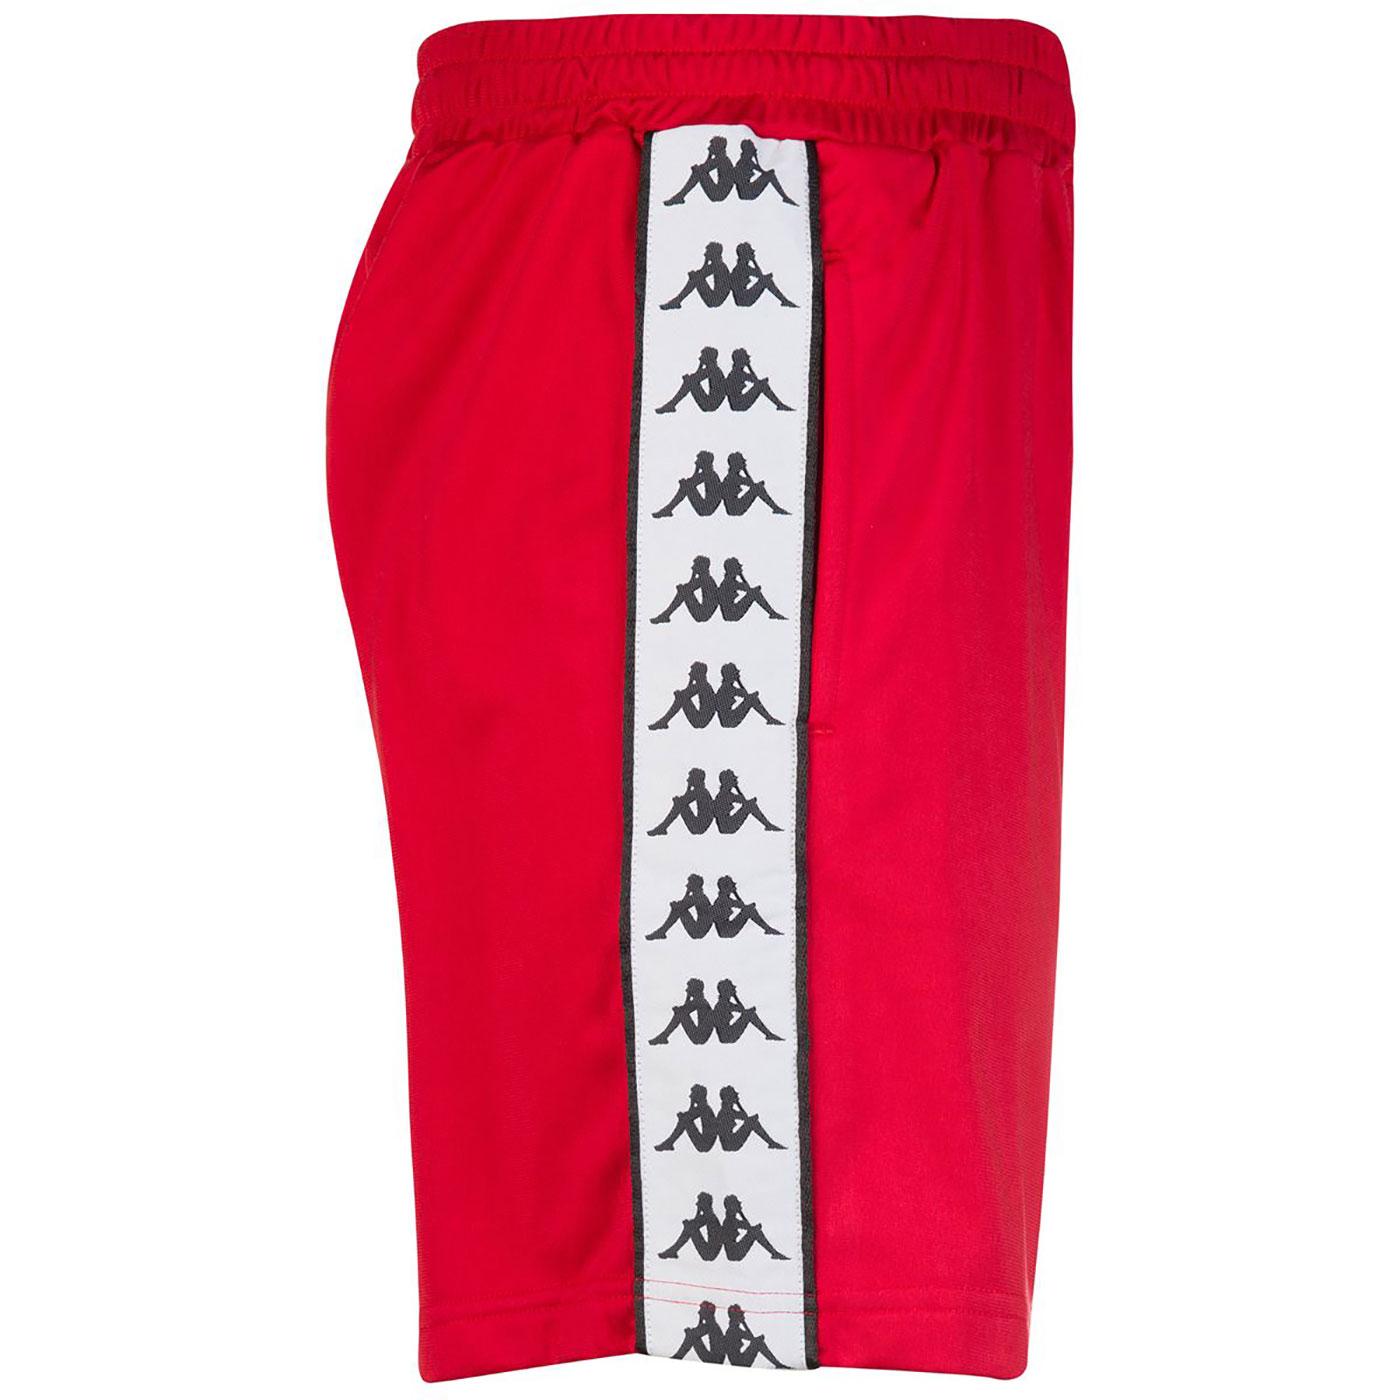 KAPPA Cole Men's Retro Seventies Football Shorts in Red